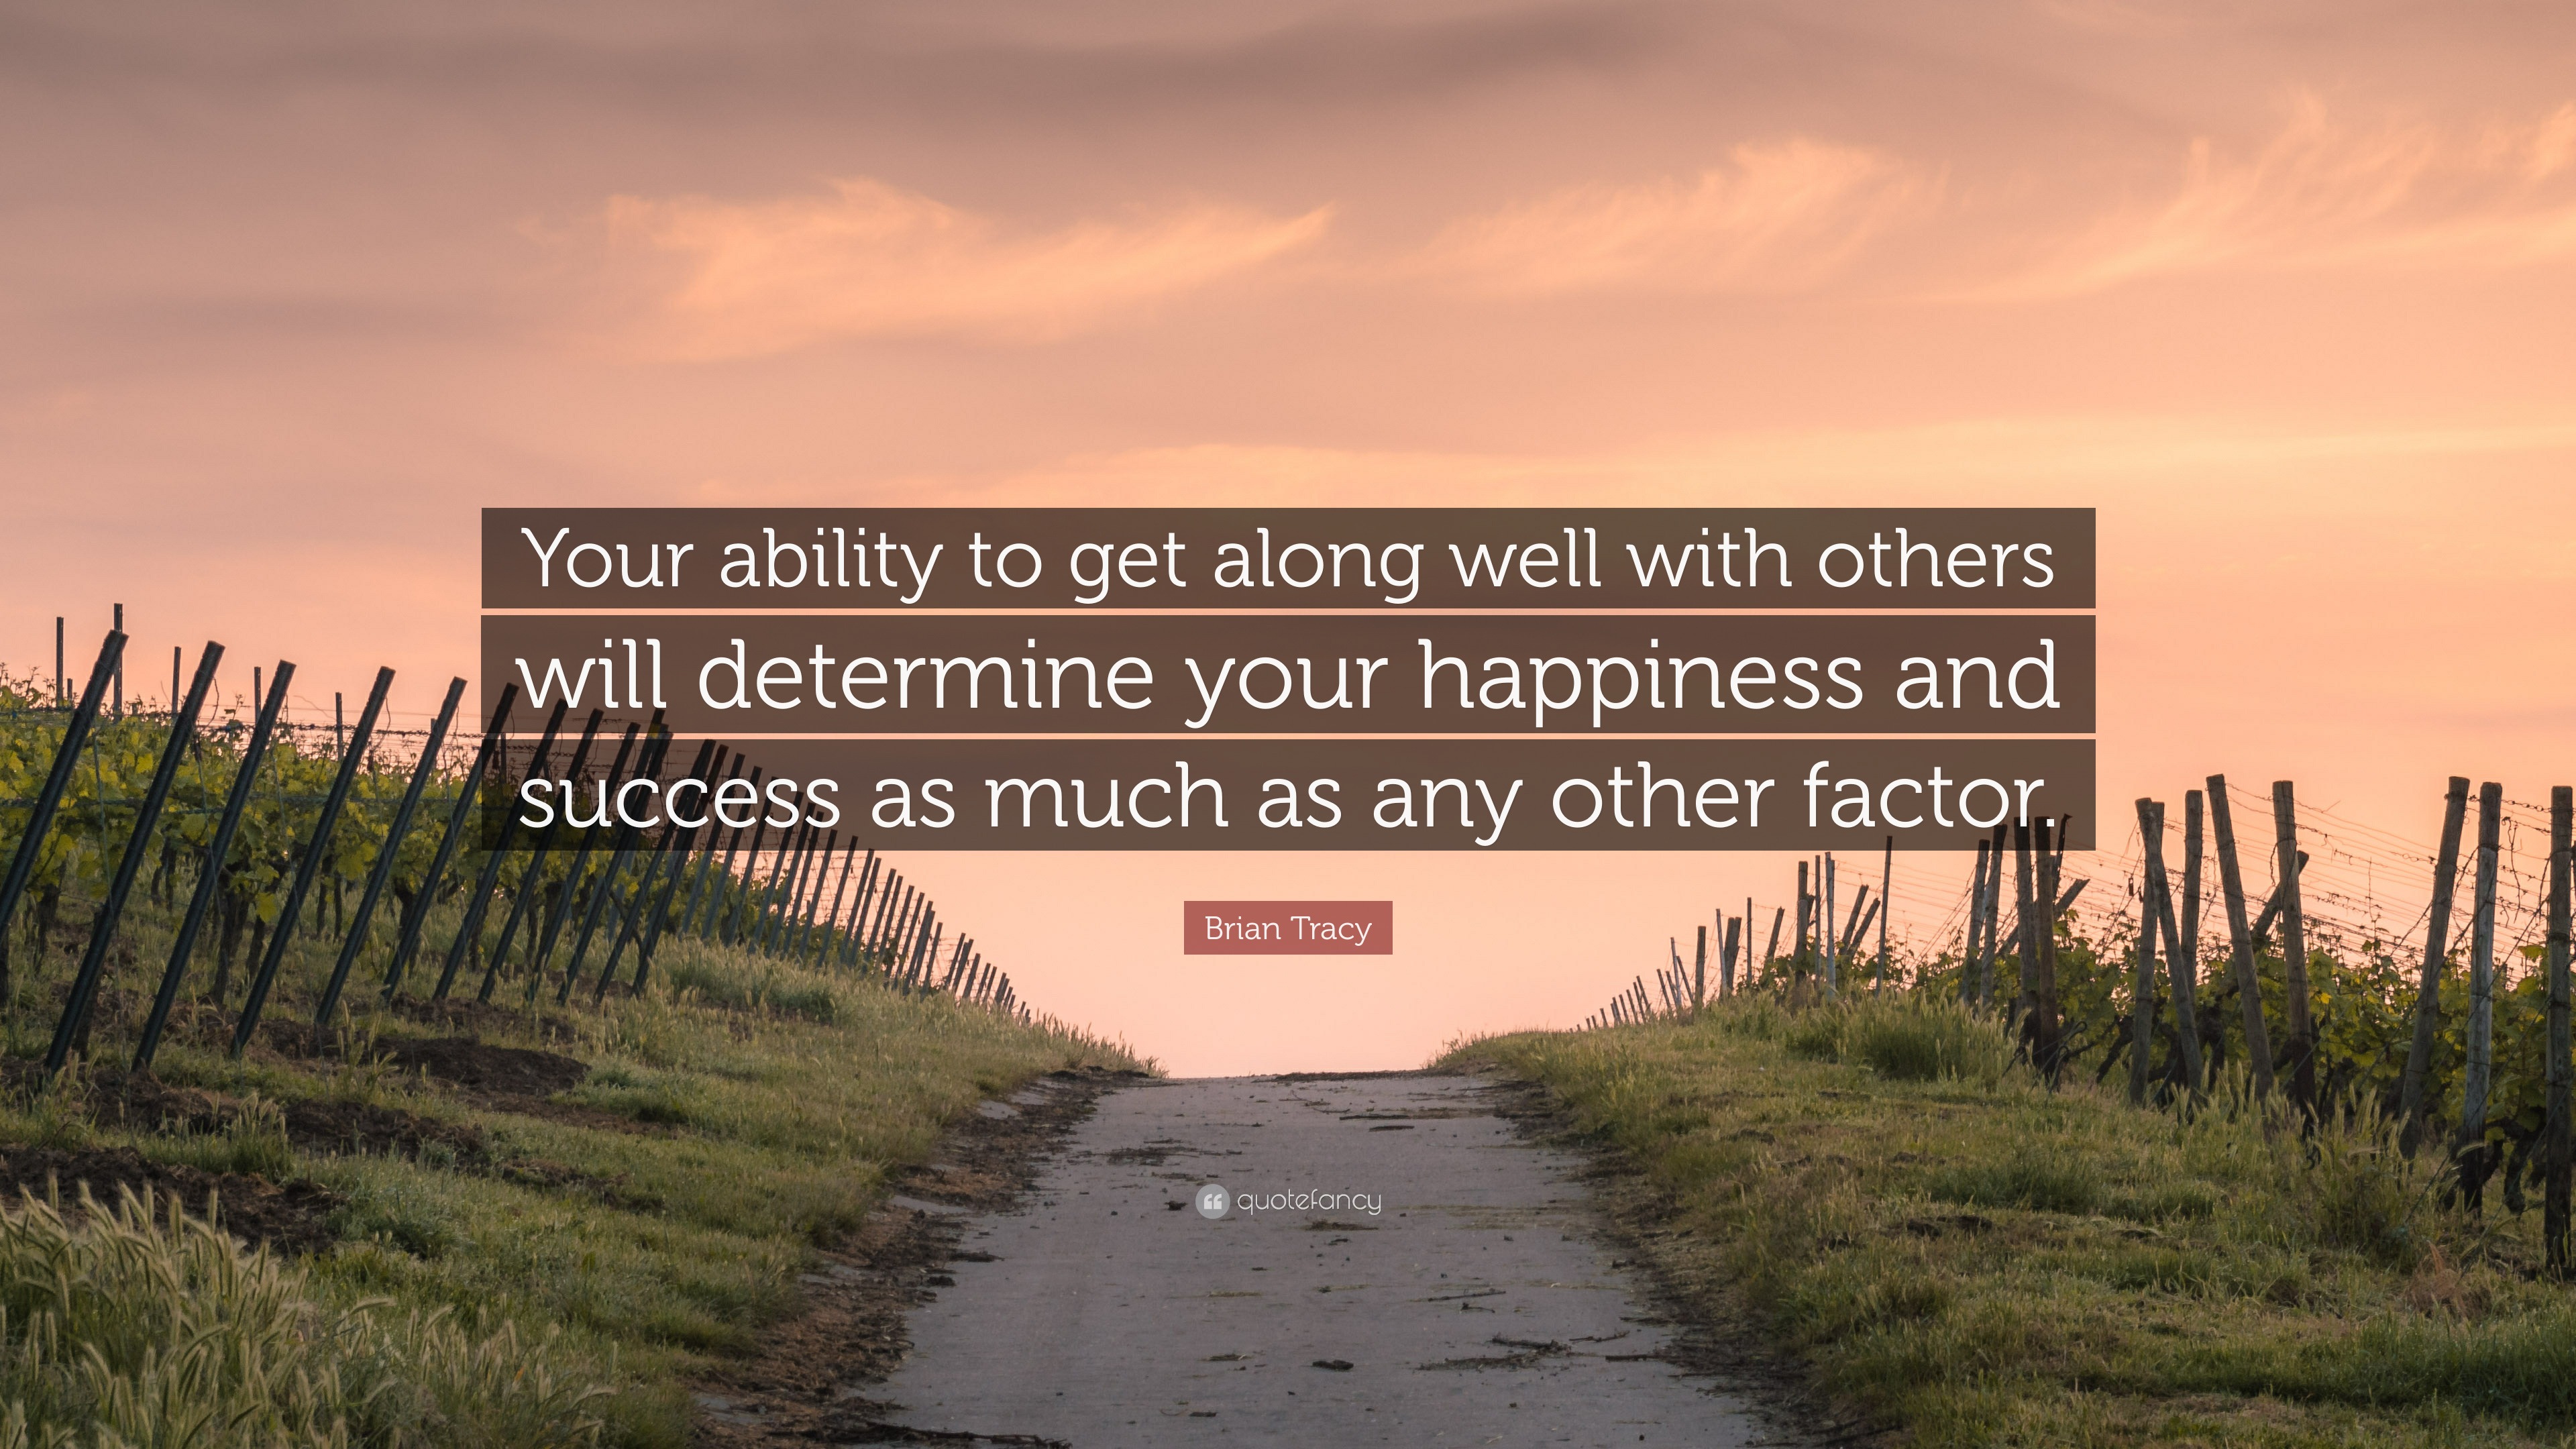 Brian Tracy Quote Your Ability To Get Along Well With Others Will Determine Your Happiness And